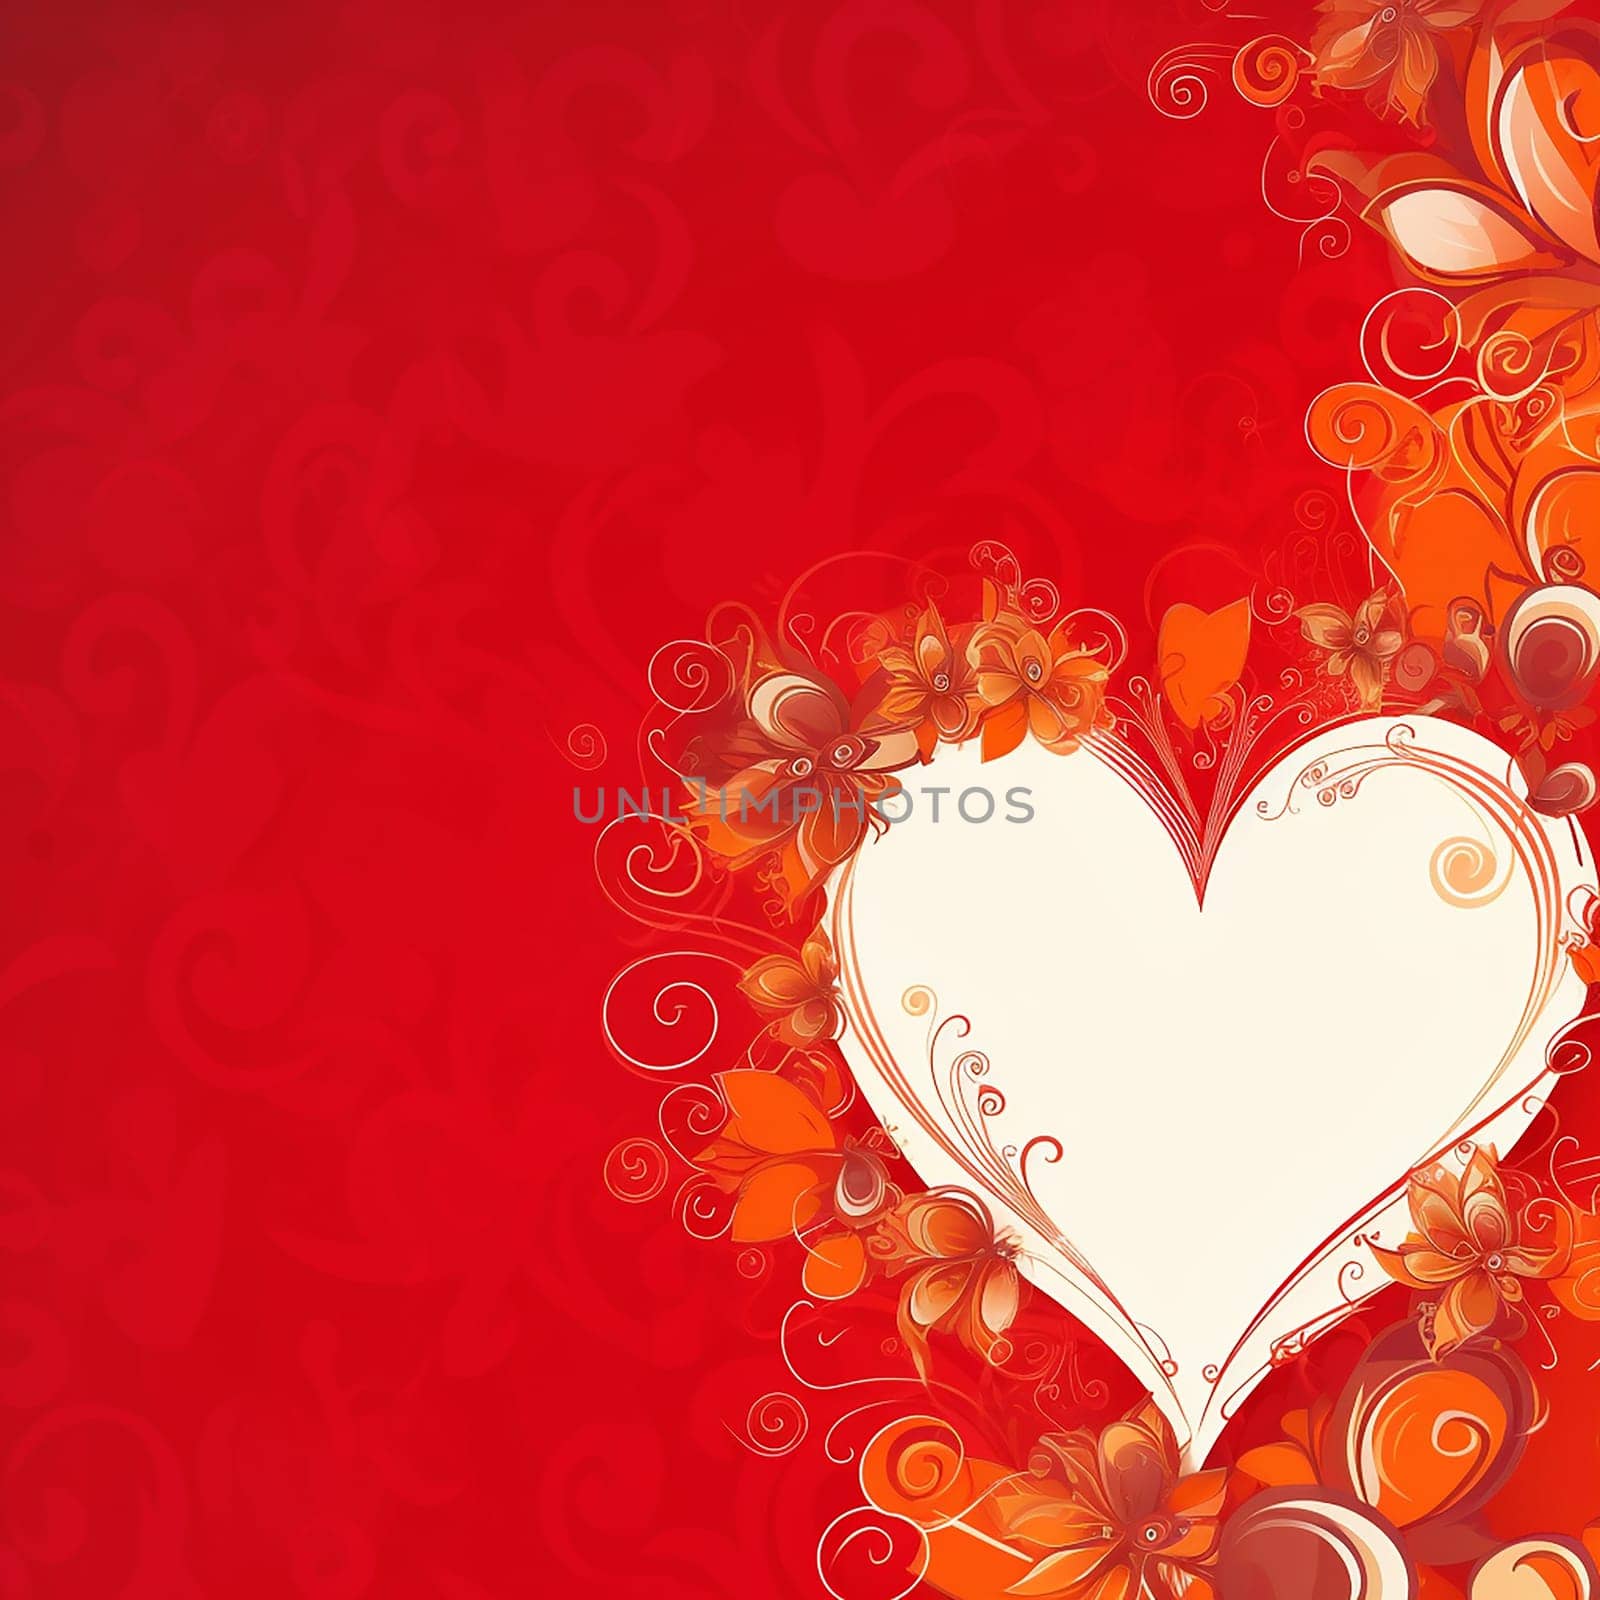 Illustration of a stylized white heart on a red background with orange floral elements.